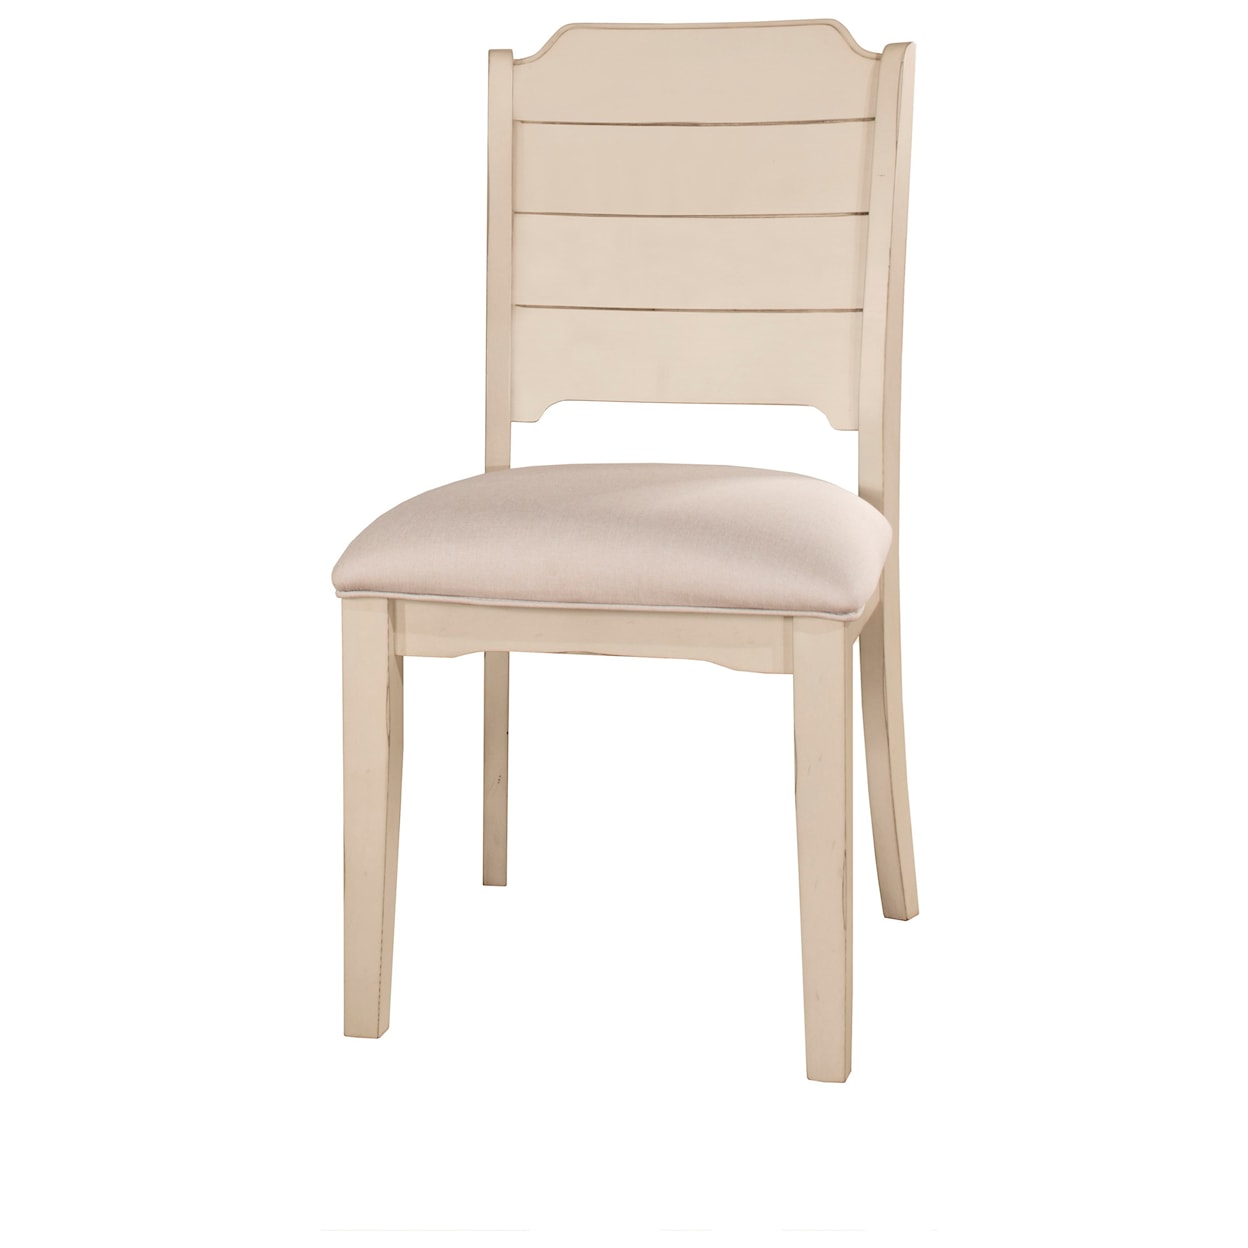 HD Furnishings Clarion Dining Side Chair - Set of 2